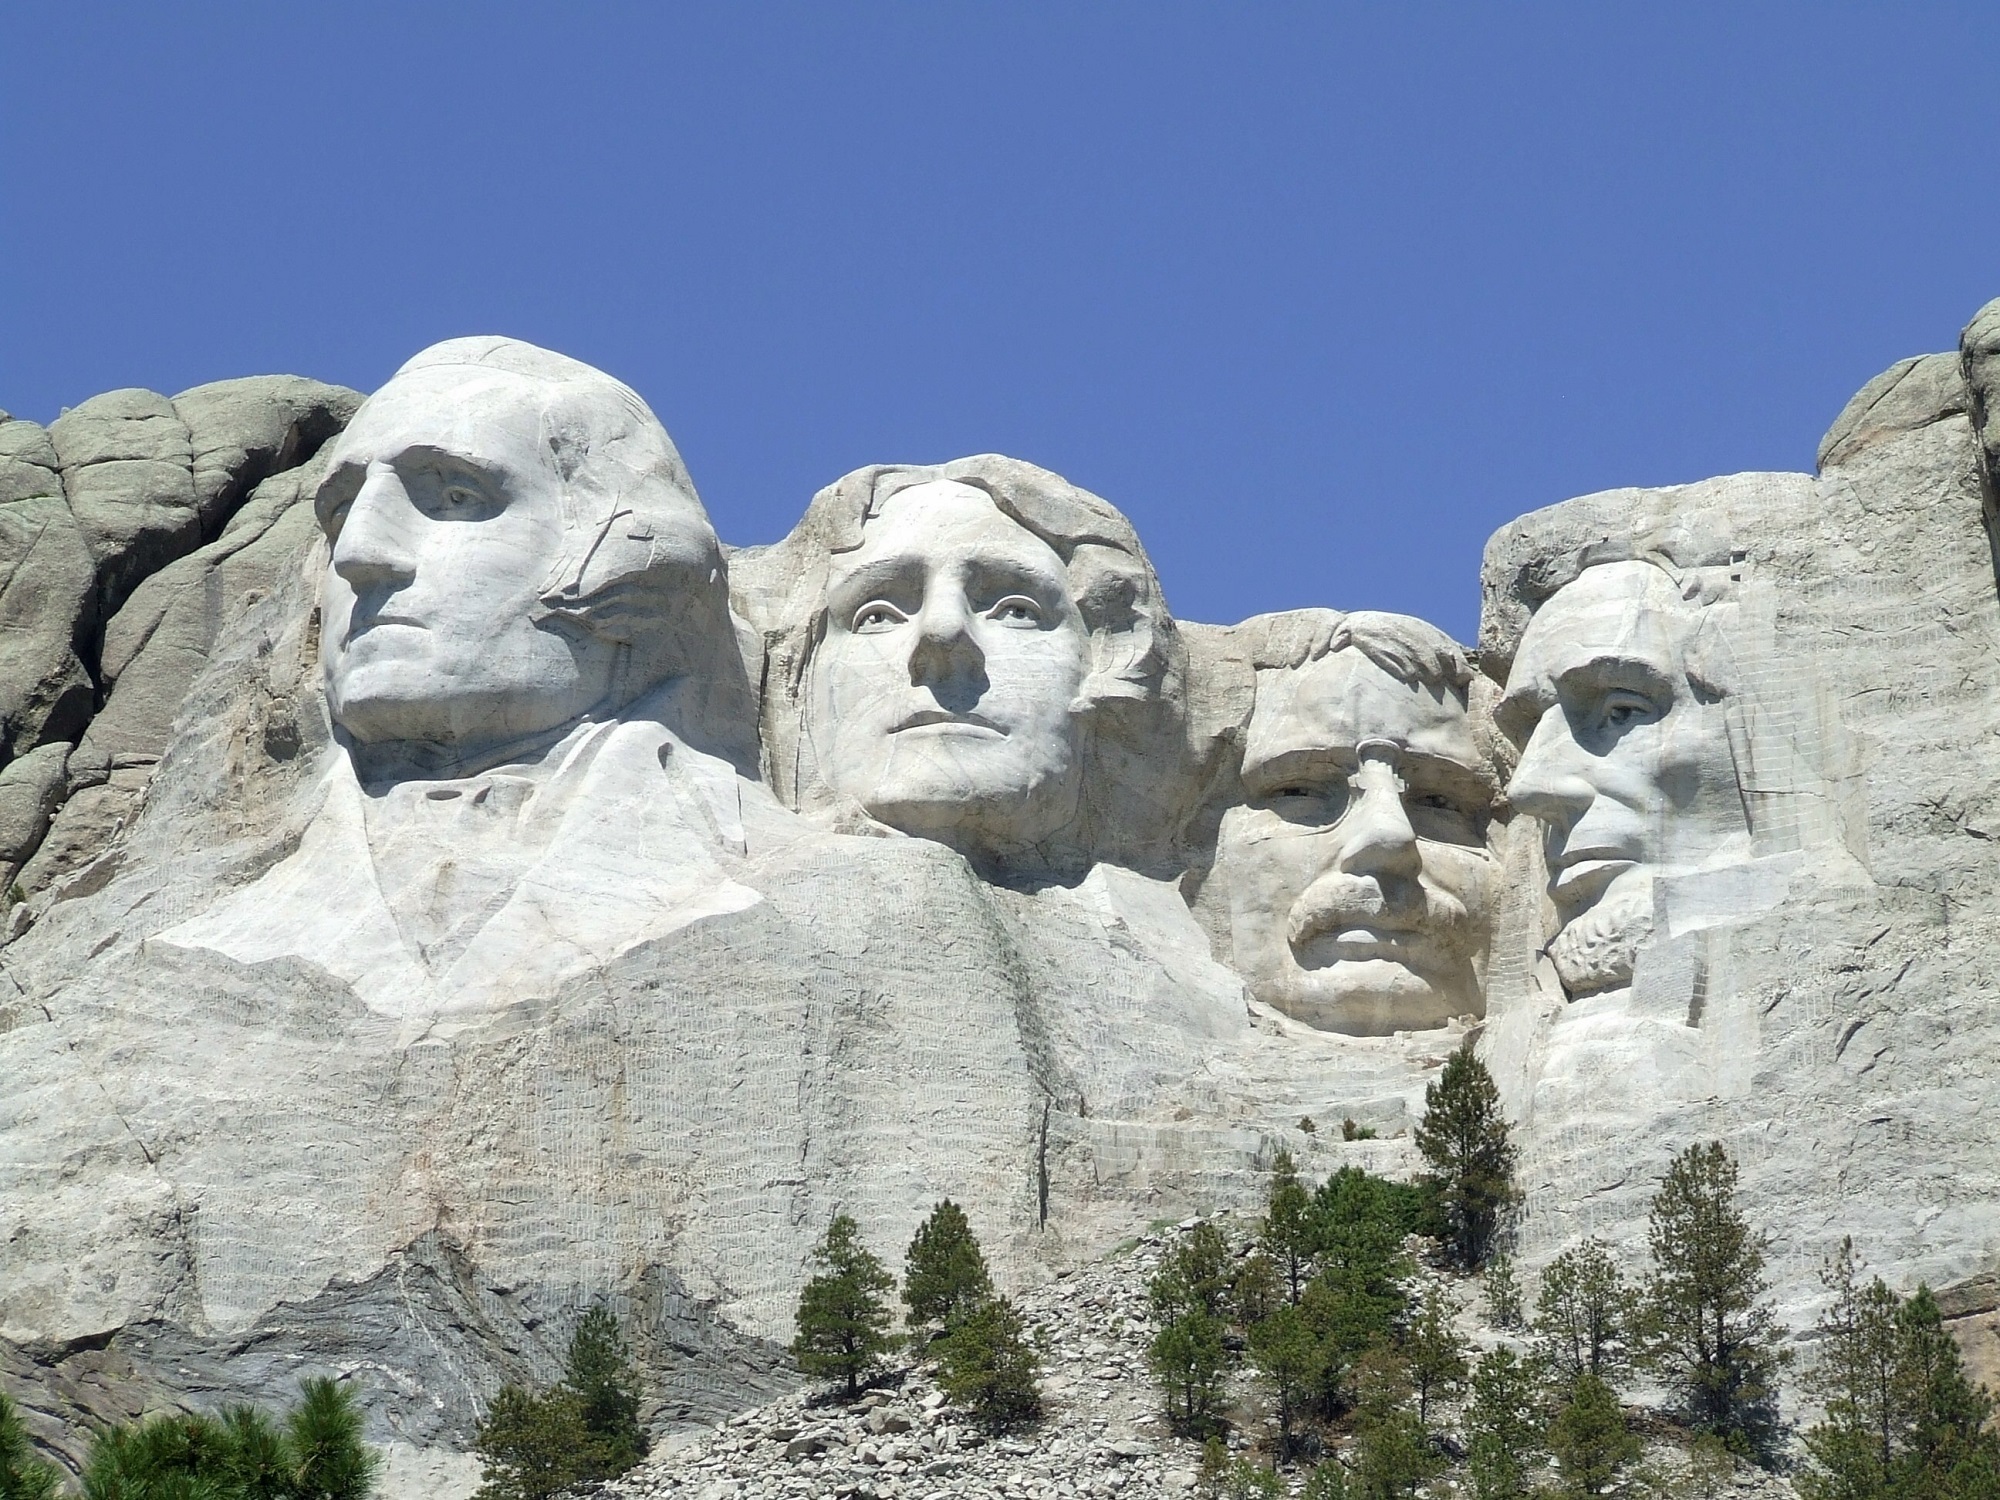 Seven Things To Do On President's Day